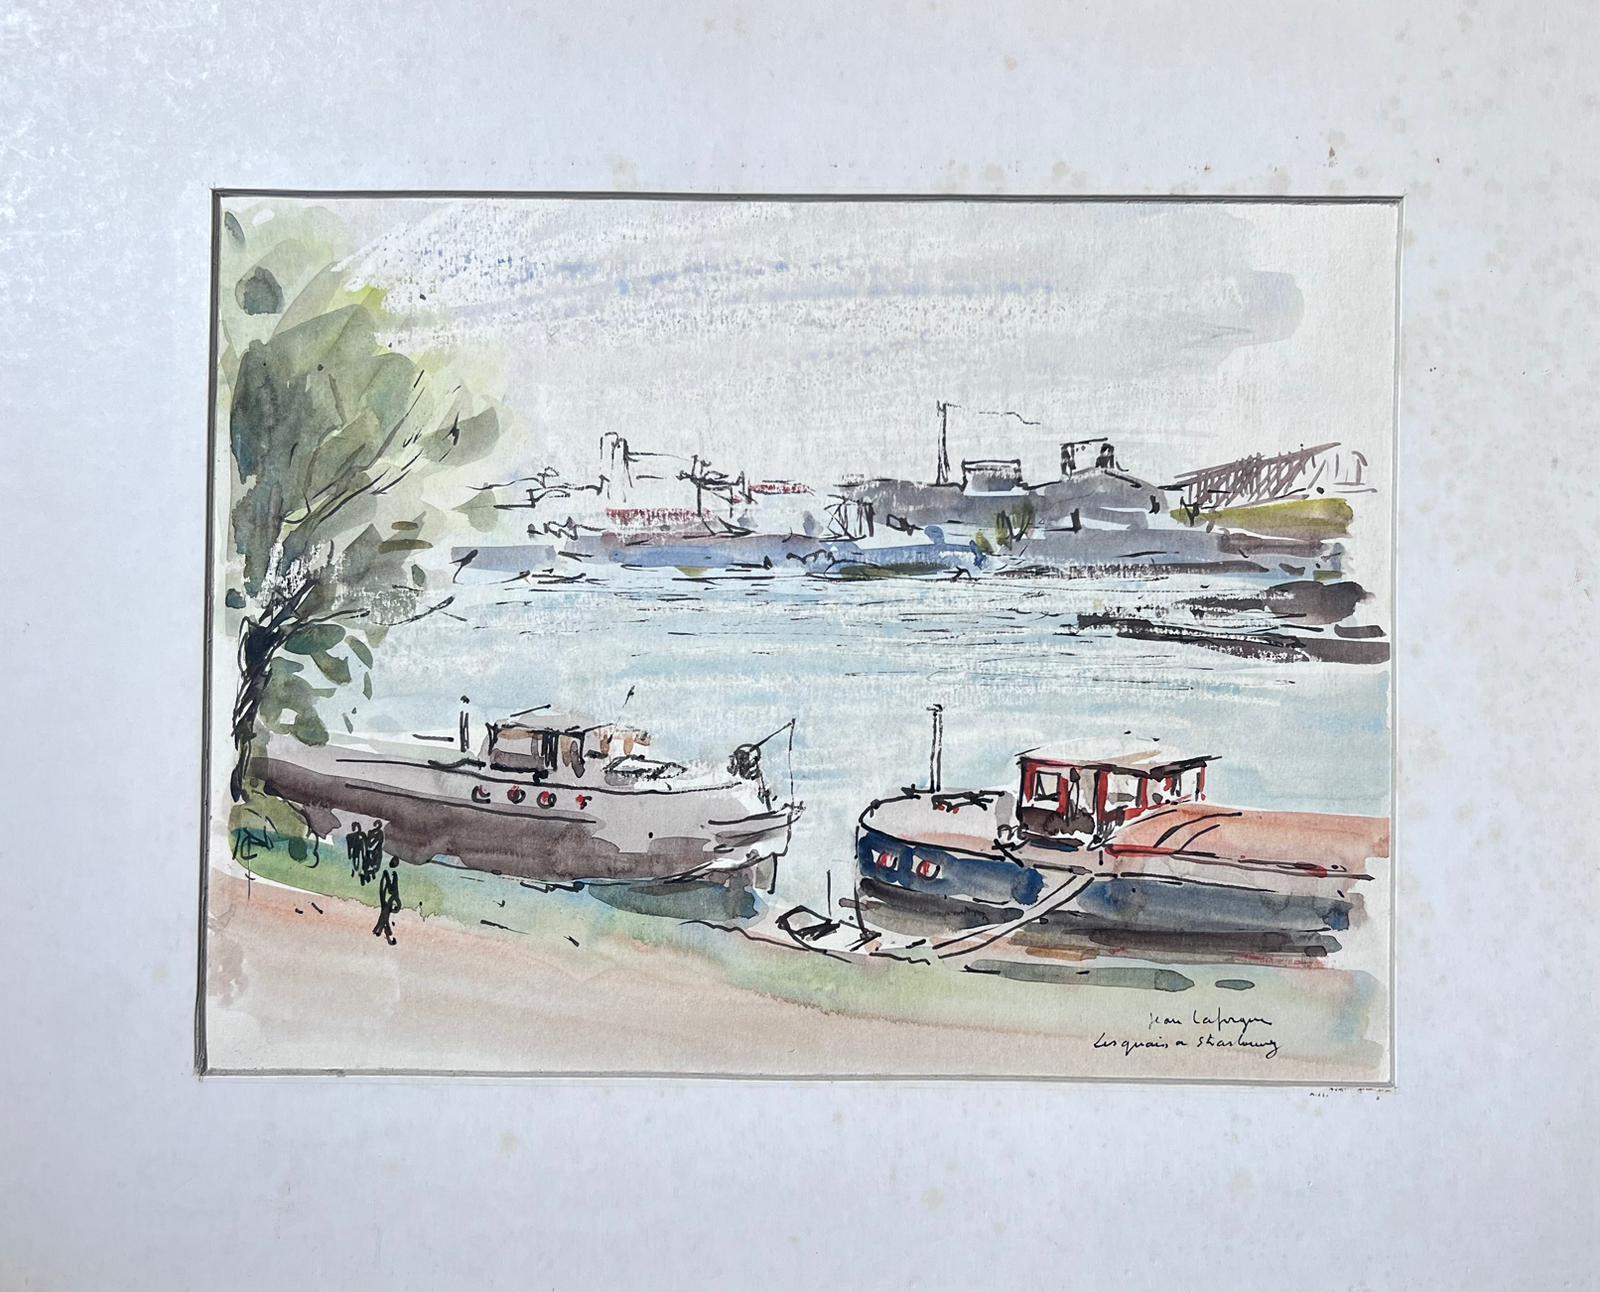 Le Quai des Strasbourg
Jean La Forgue (French 1901-1975) 
signed watercolour, ink on paper, mounted in a card frame
inscribed verso
card frame: 14 x 17 inches
painting: 9 x 12 inches
provenance: the artists estate, France
condition: very good and